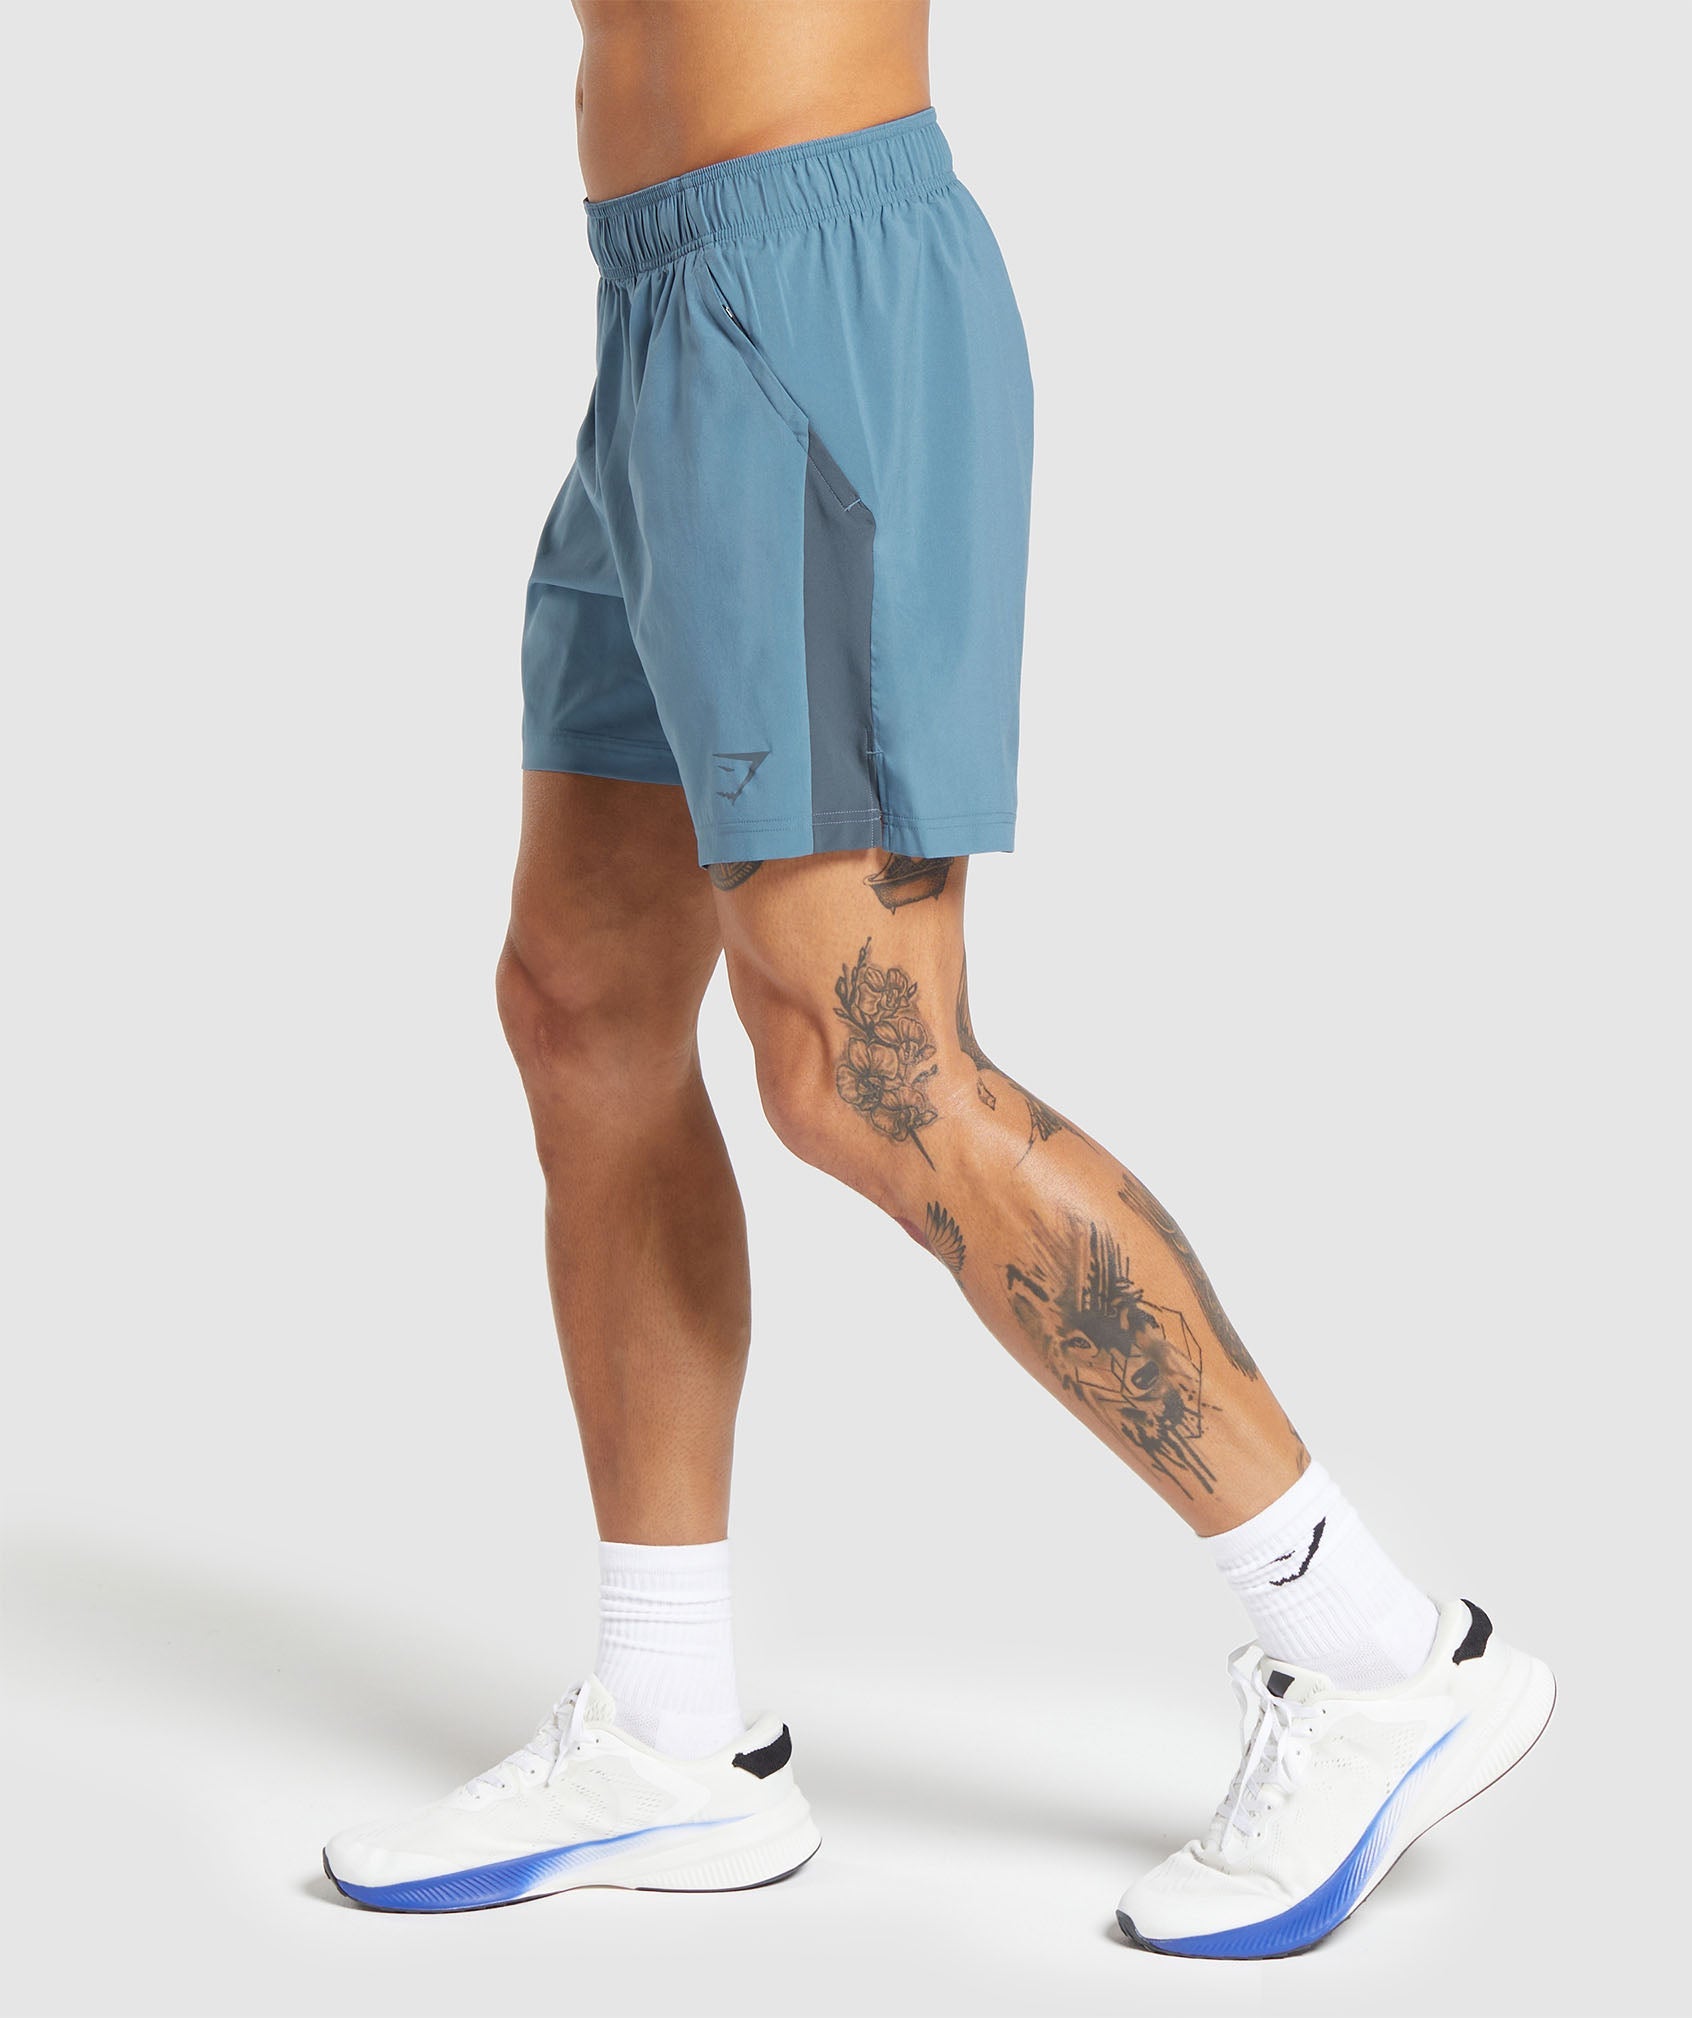 Sport 7" Shorts in Faded Blue/Titanium Blue - view 3